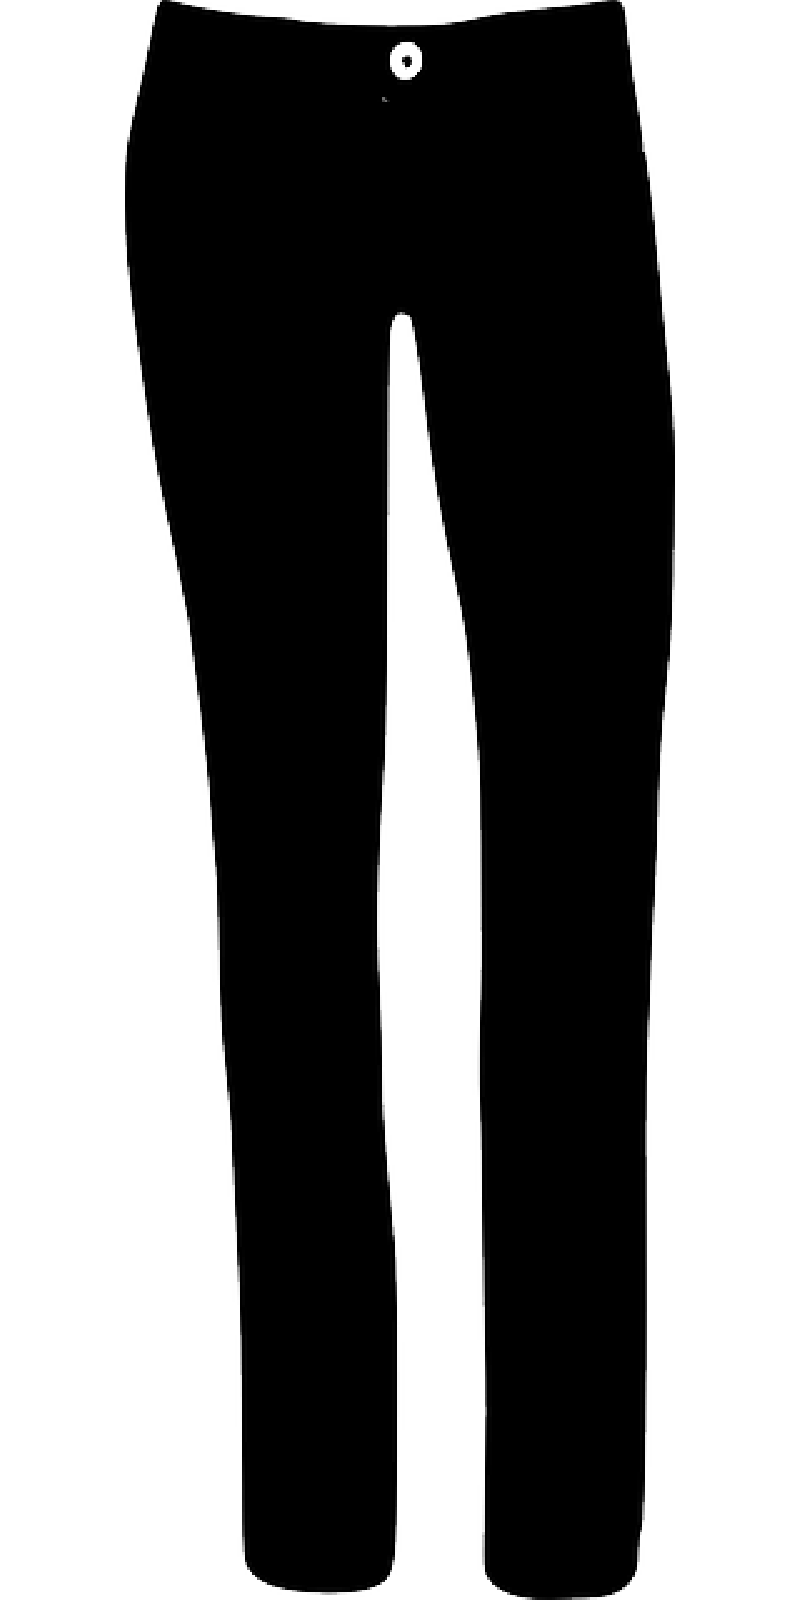 Trouser PNG Images Transparent Free Download